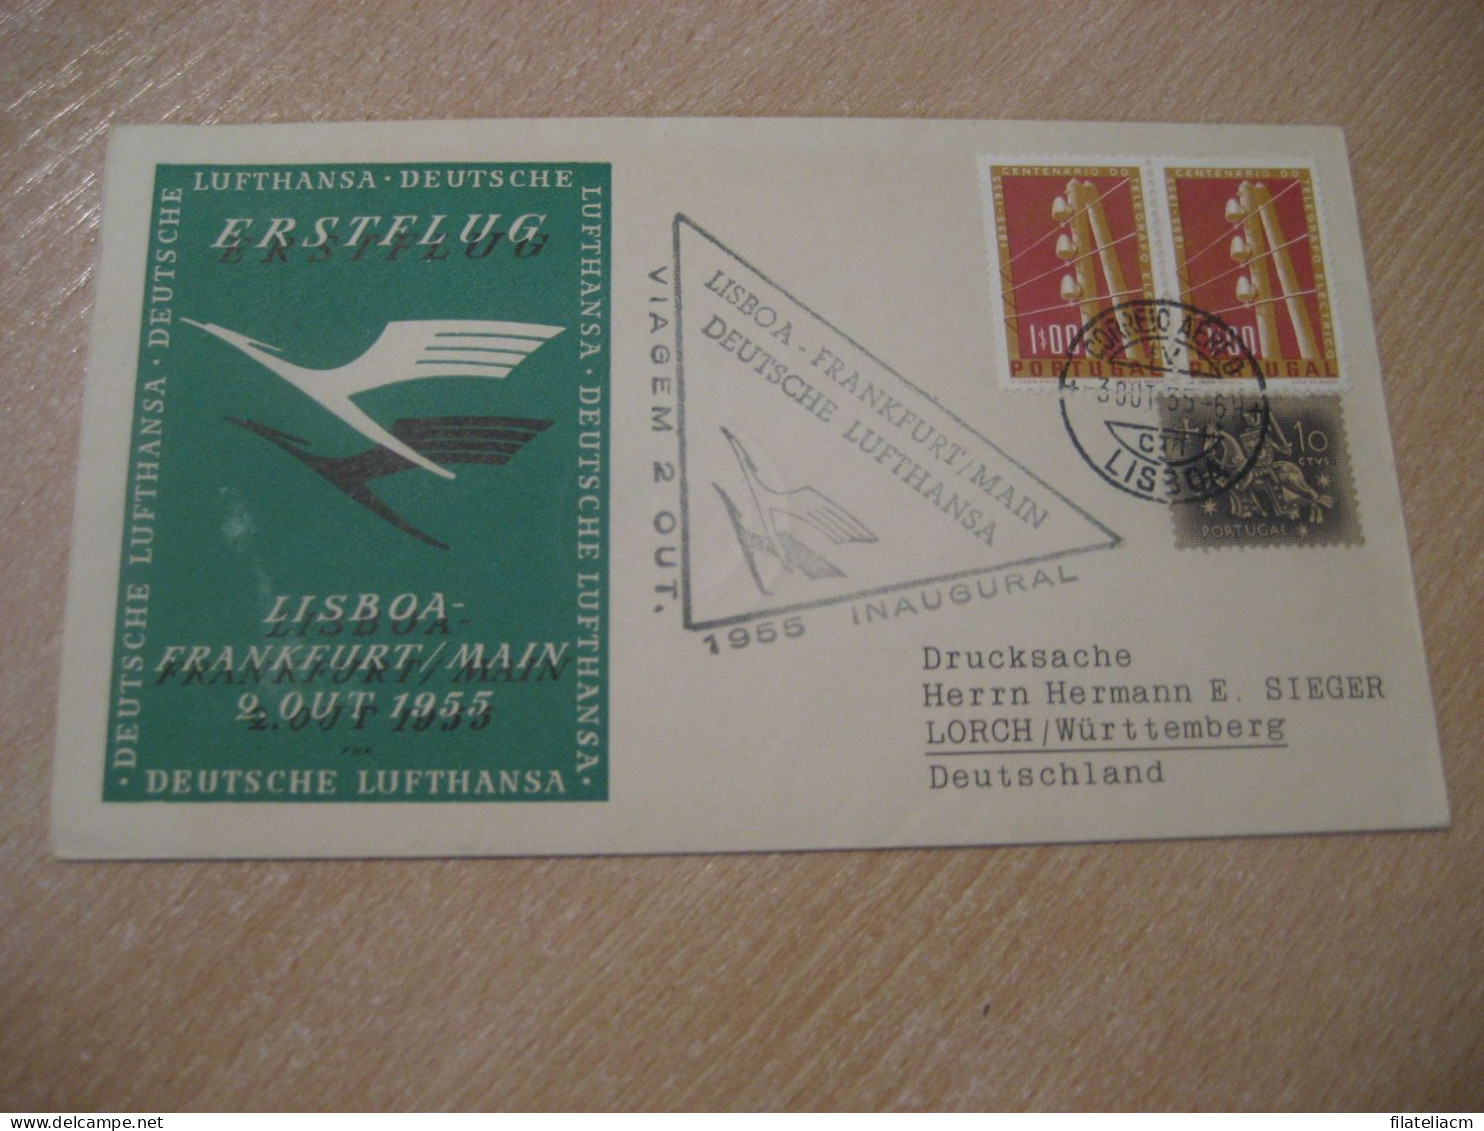 LISBOA - FRANKFURT 1955 To Lorch First Flight Inaugural Lufthansa Cancel Cover PORTUGAL GERMANY - Lettres & Documents